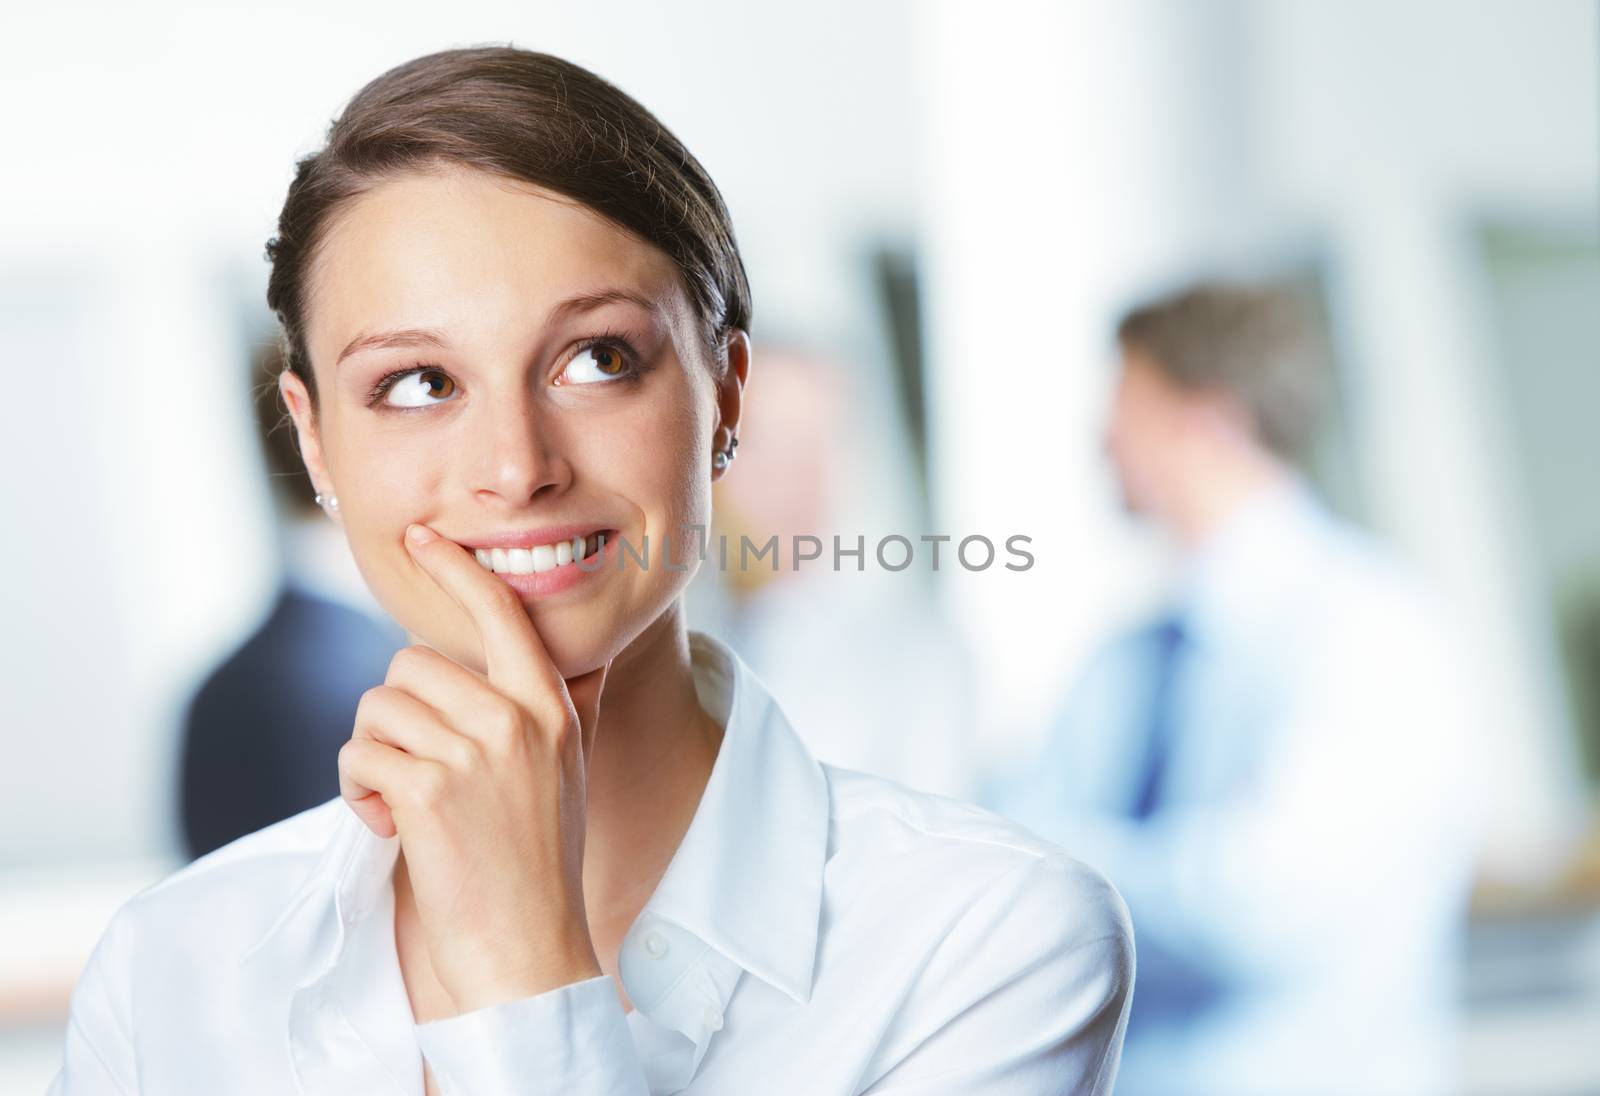 Smiling young business woman by stokkete